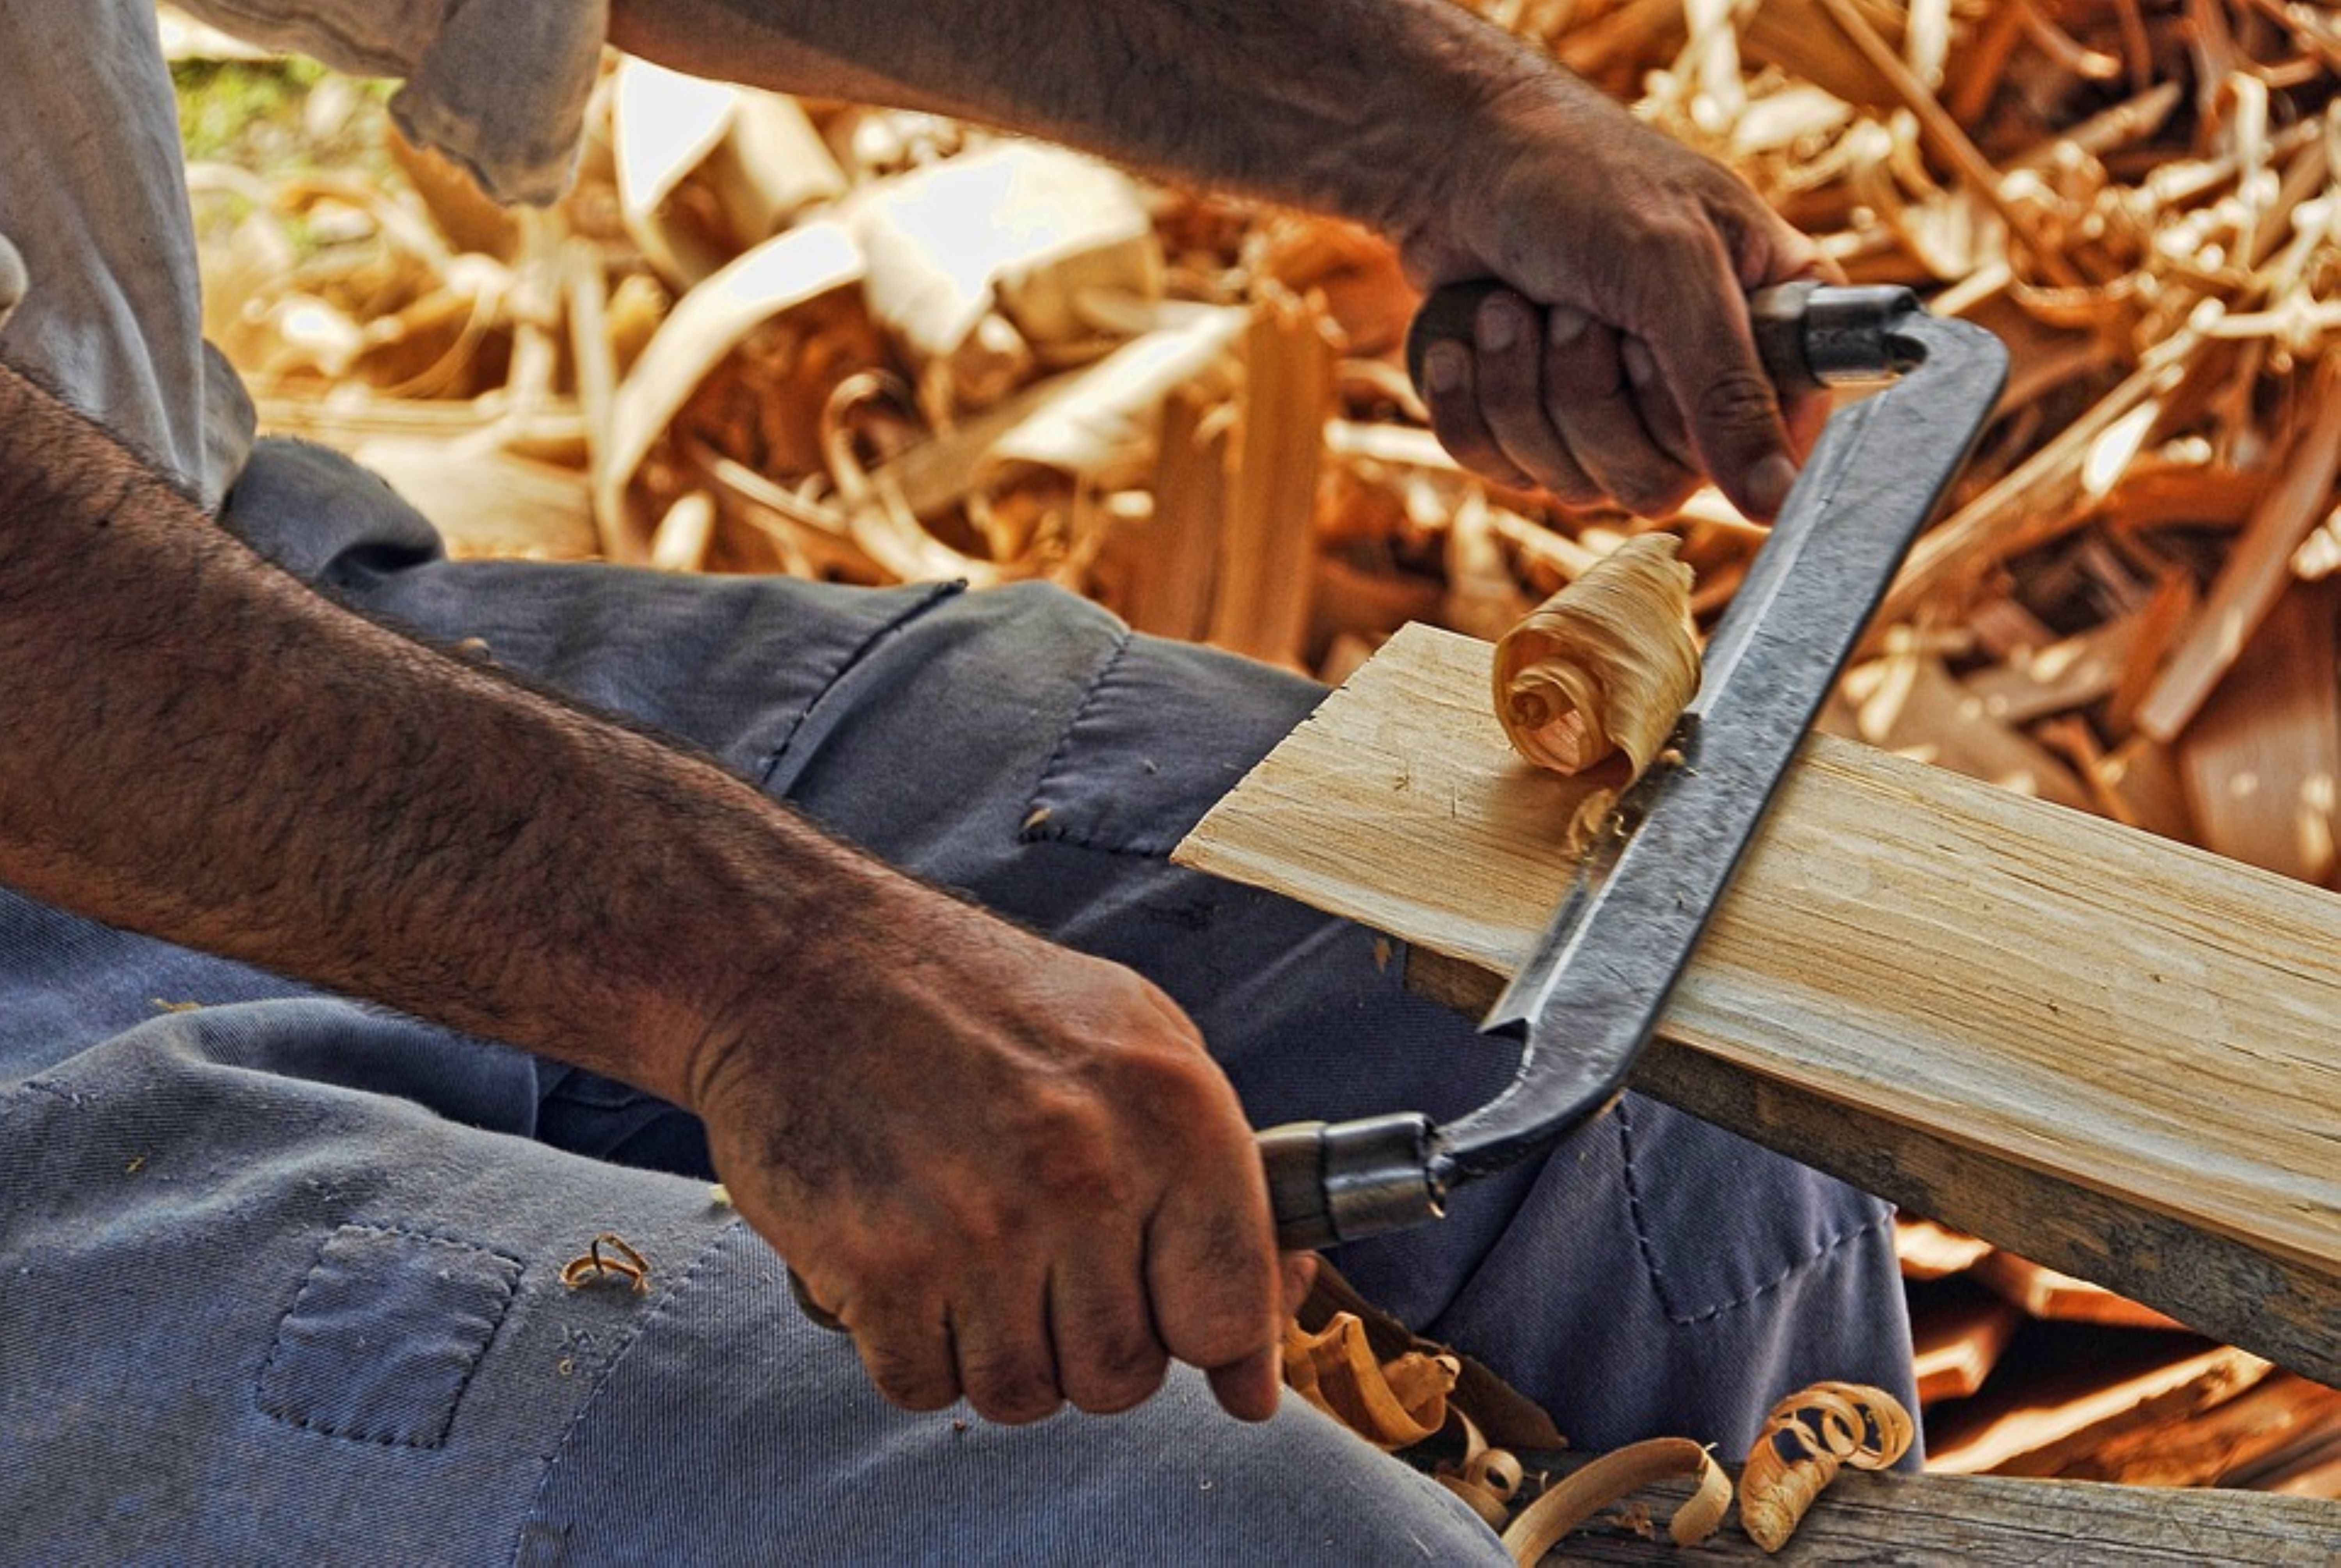 Things to consider when starting a woodworking business